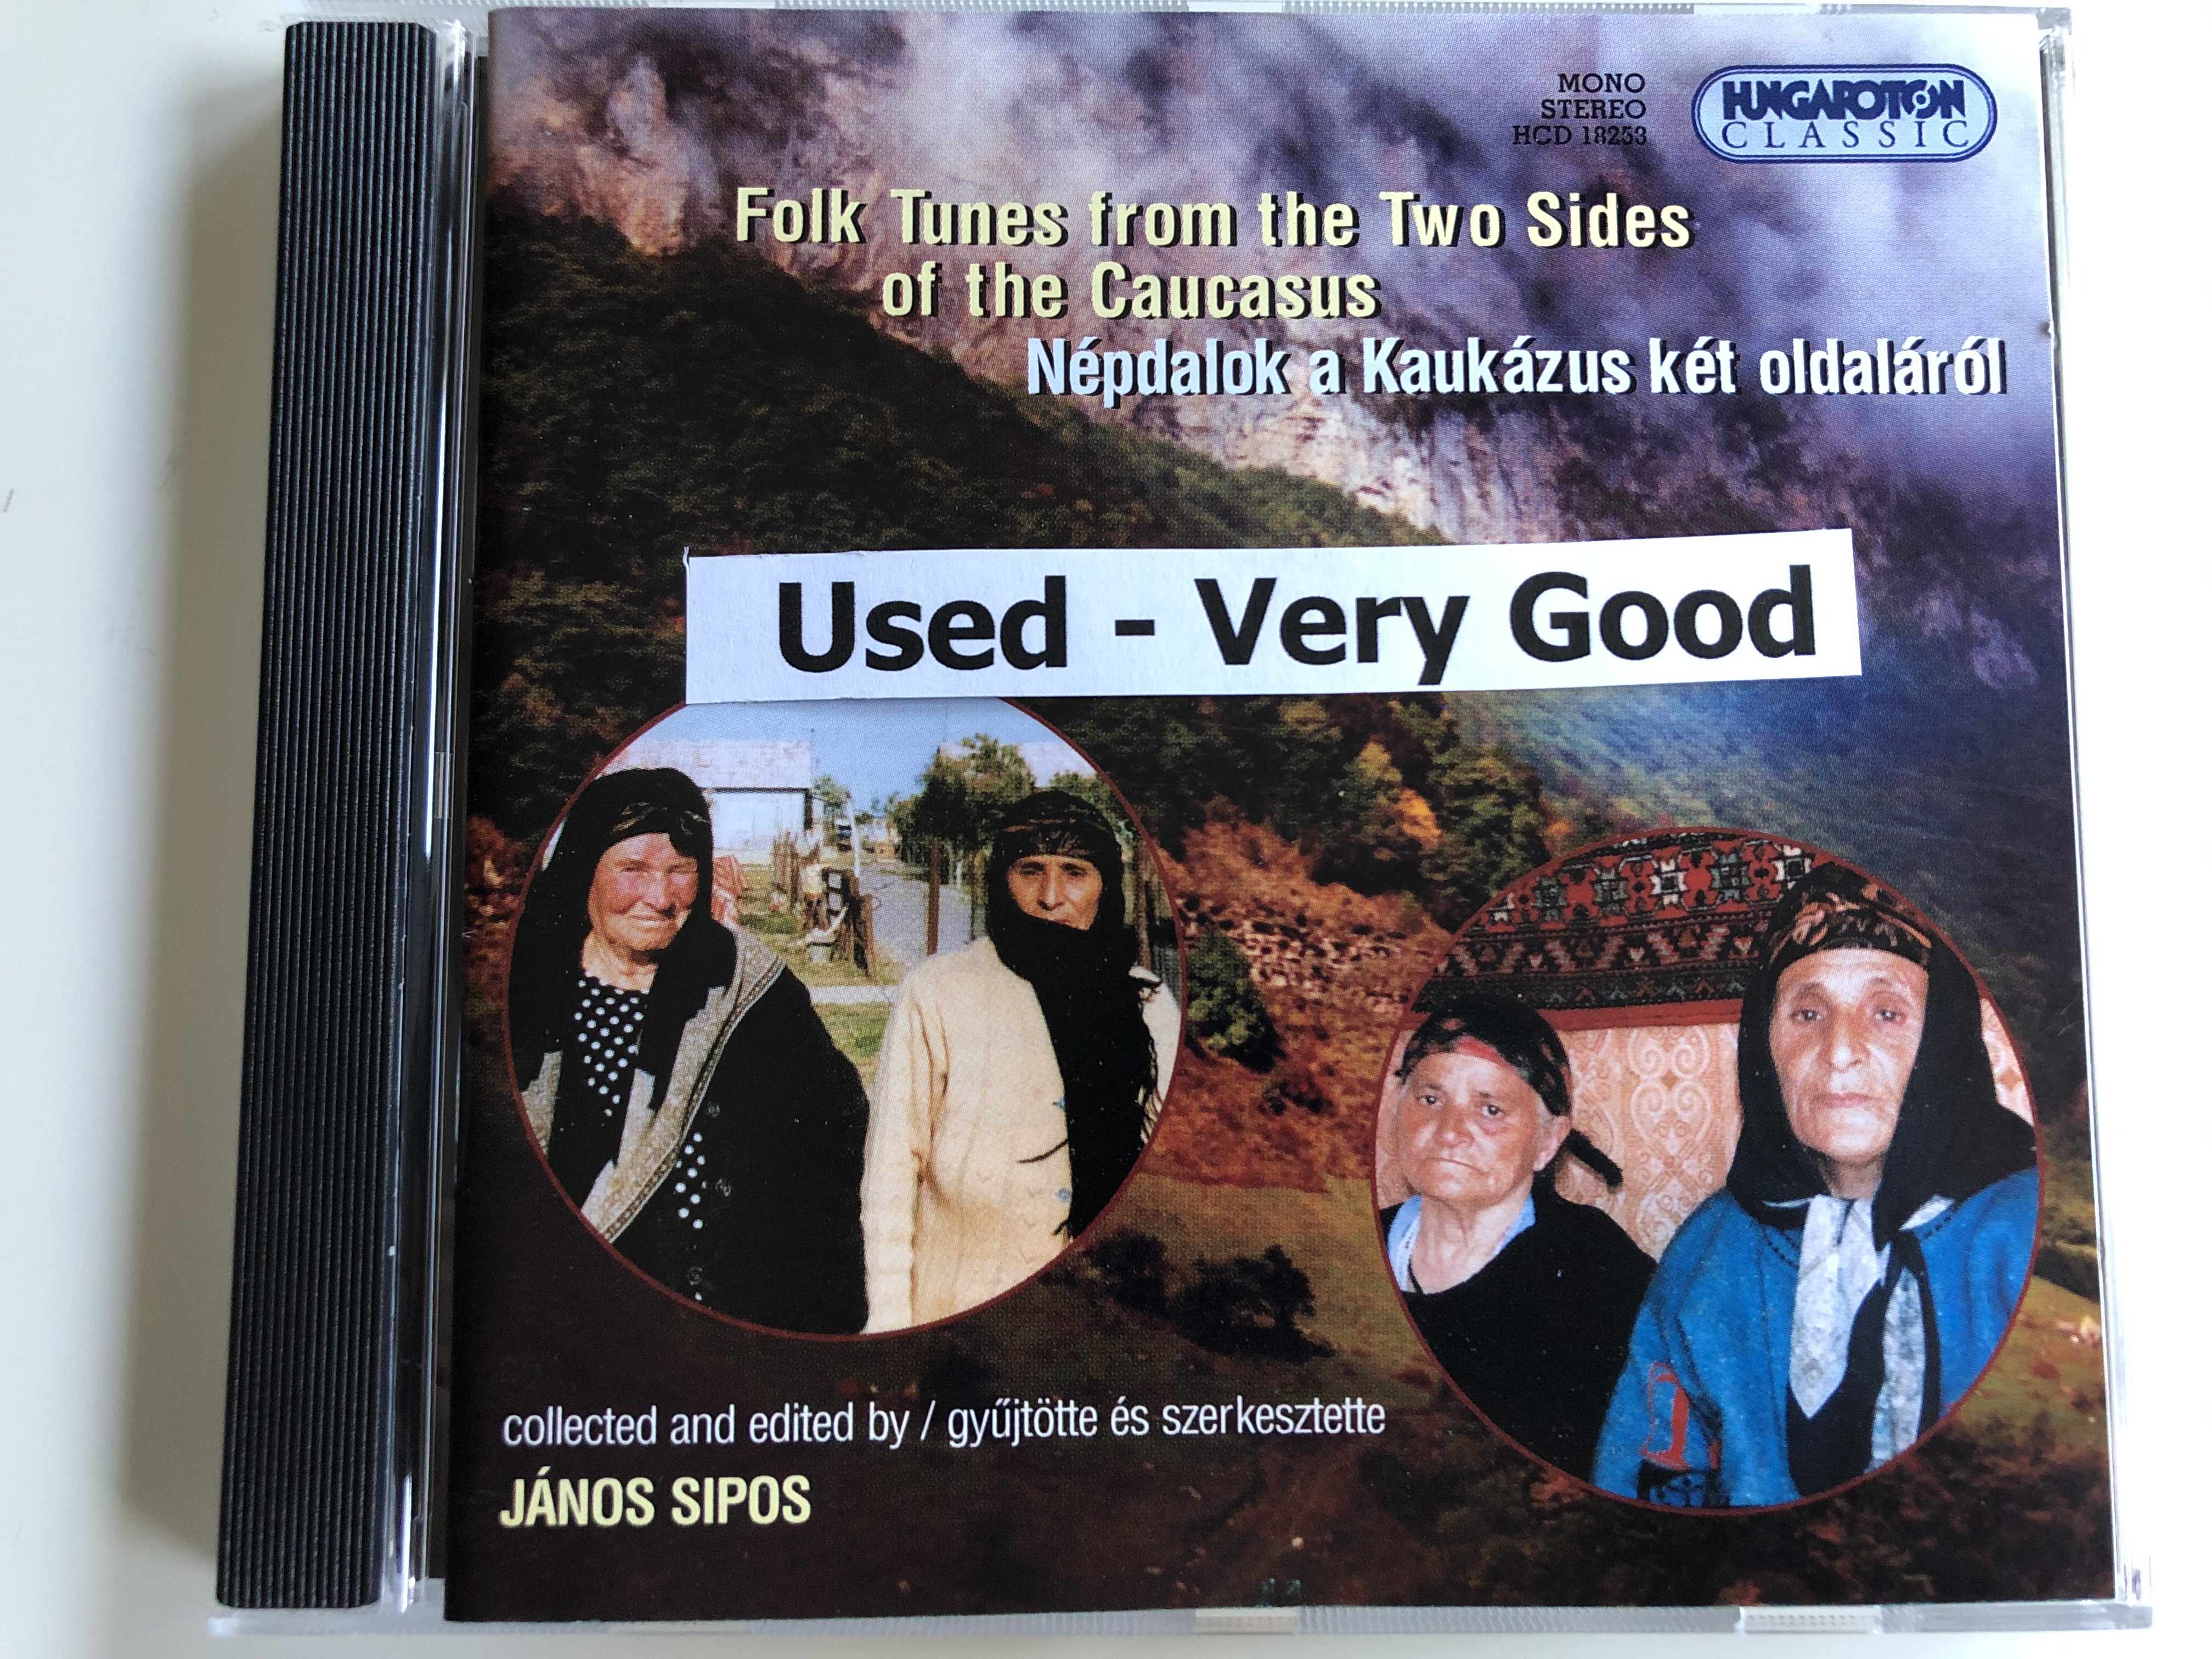 folk-tunes-from-the-two-sides-of-the-caucasus-nepdalok-a-kaukazus-ket-oldalarol-collected-and-edited-by-janos-sipos-hungaroton-classic-audio-cd-2003-mono-stereo-hcd-18253-1-.jpg